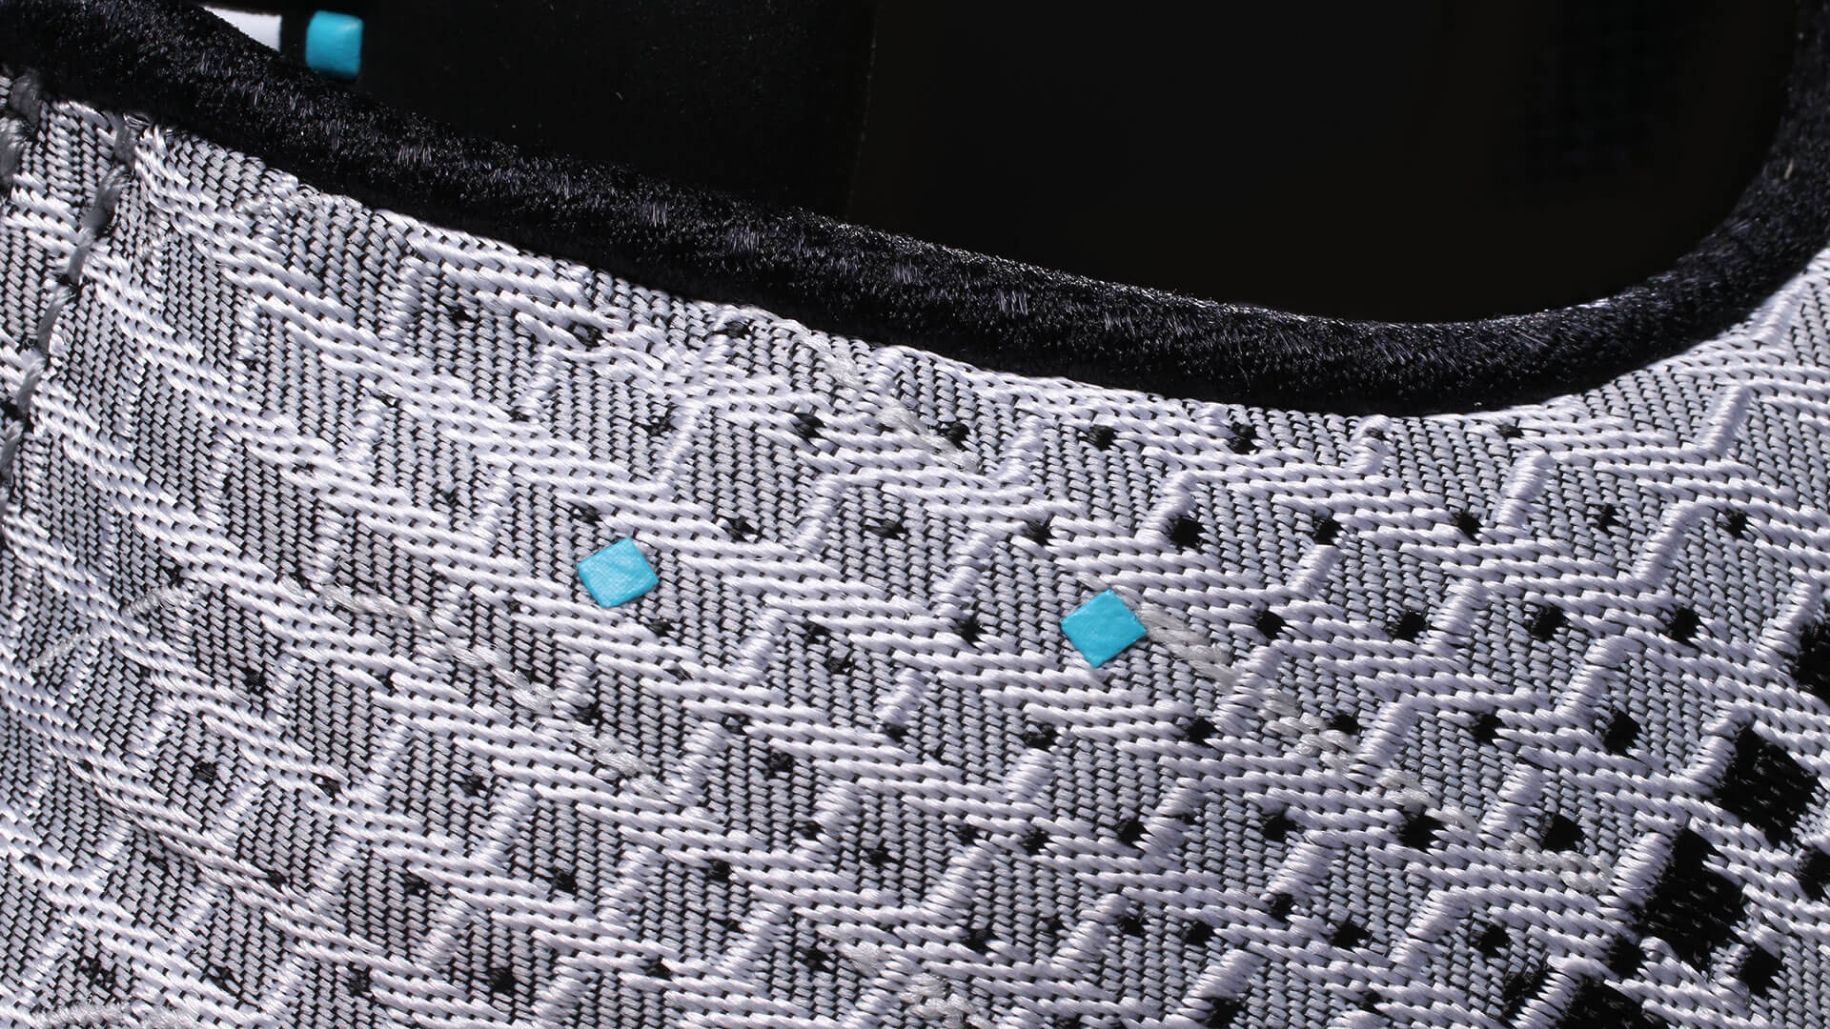 Detail of woven outer of Nike Hyper Adapt shoe